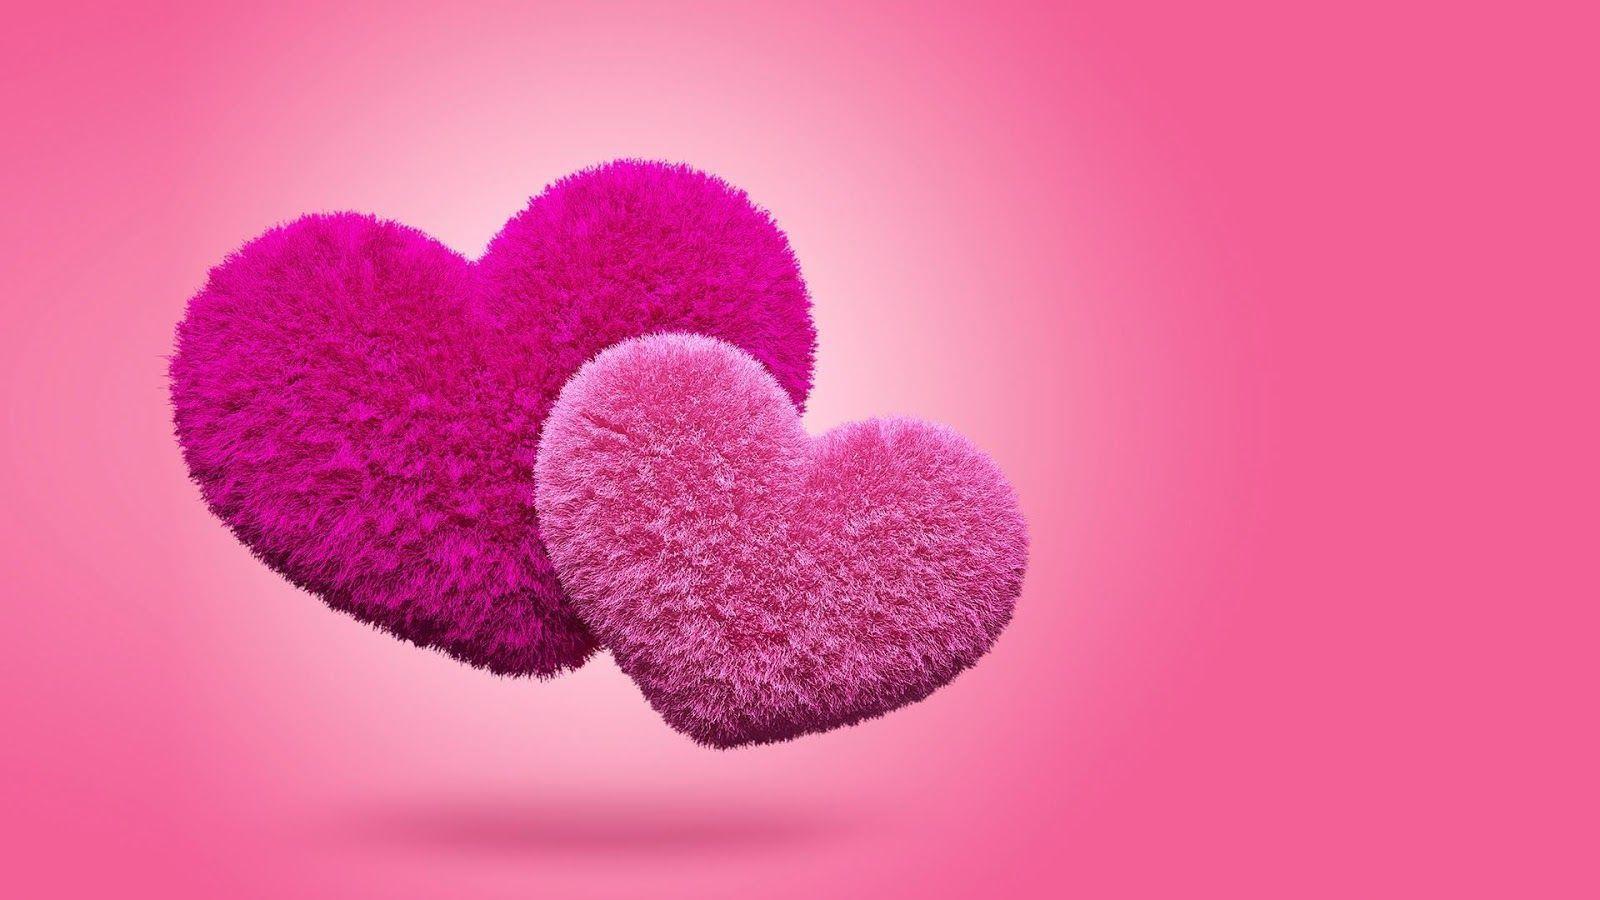 Fluffy Hearts Live Wallpaper Apps on Google Play